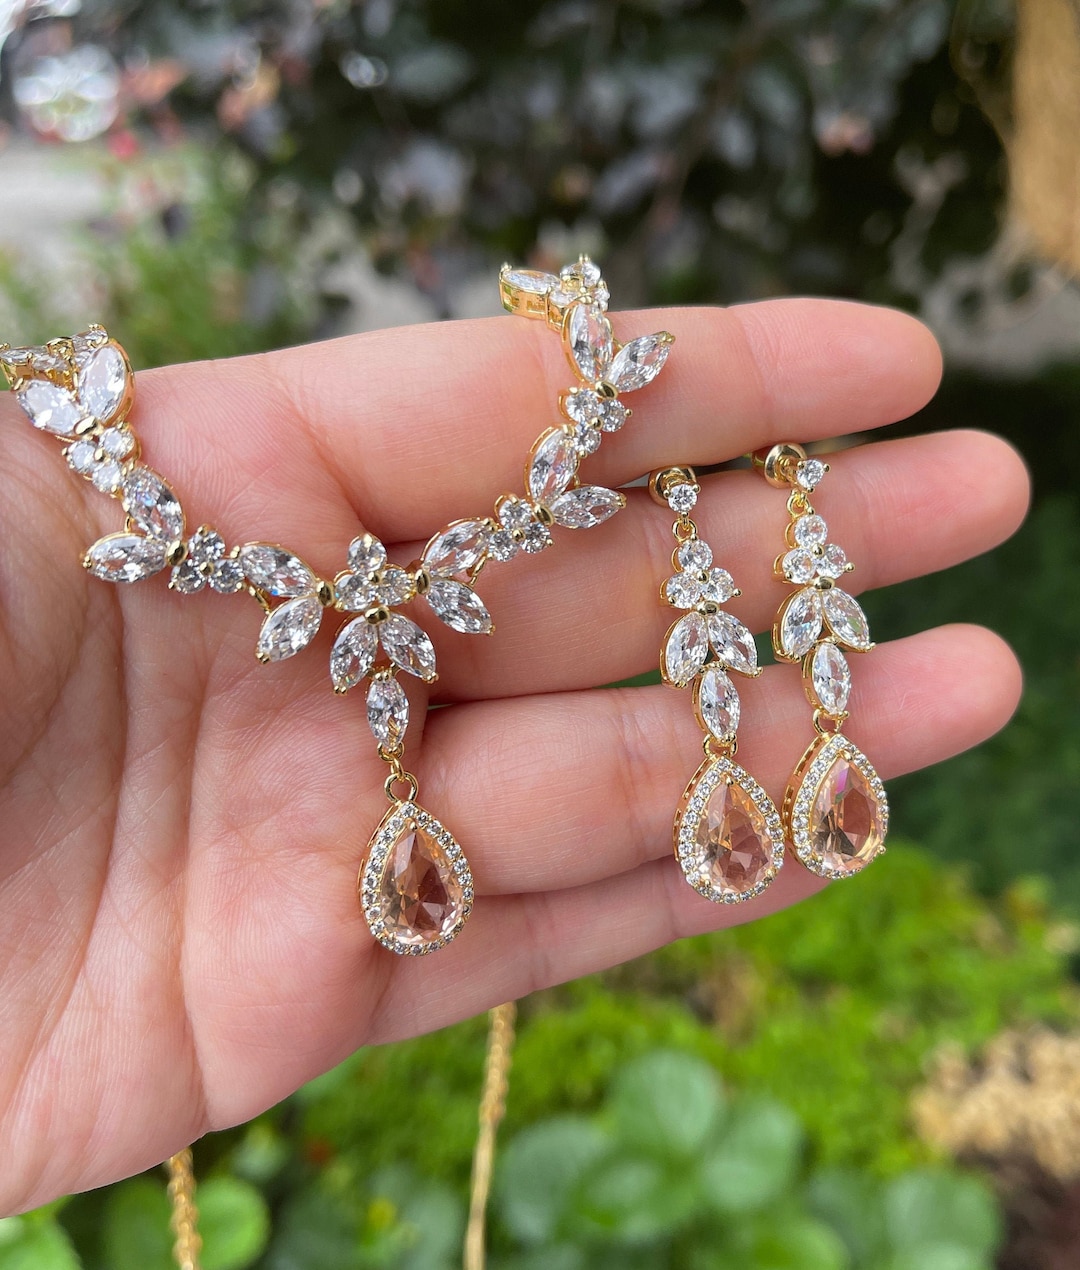 Buy CLUB BOLLYWOOD Crystal Rhinestone Pearl Flower Leaf Necklace Earrings  Set Bridal Bridesmaid Jewelry  Jewelry  Watches  Fashion Jewelry  Jewelry  Sets at Amazonin